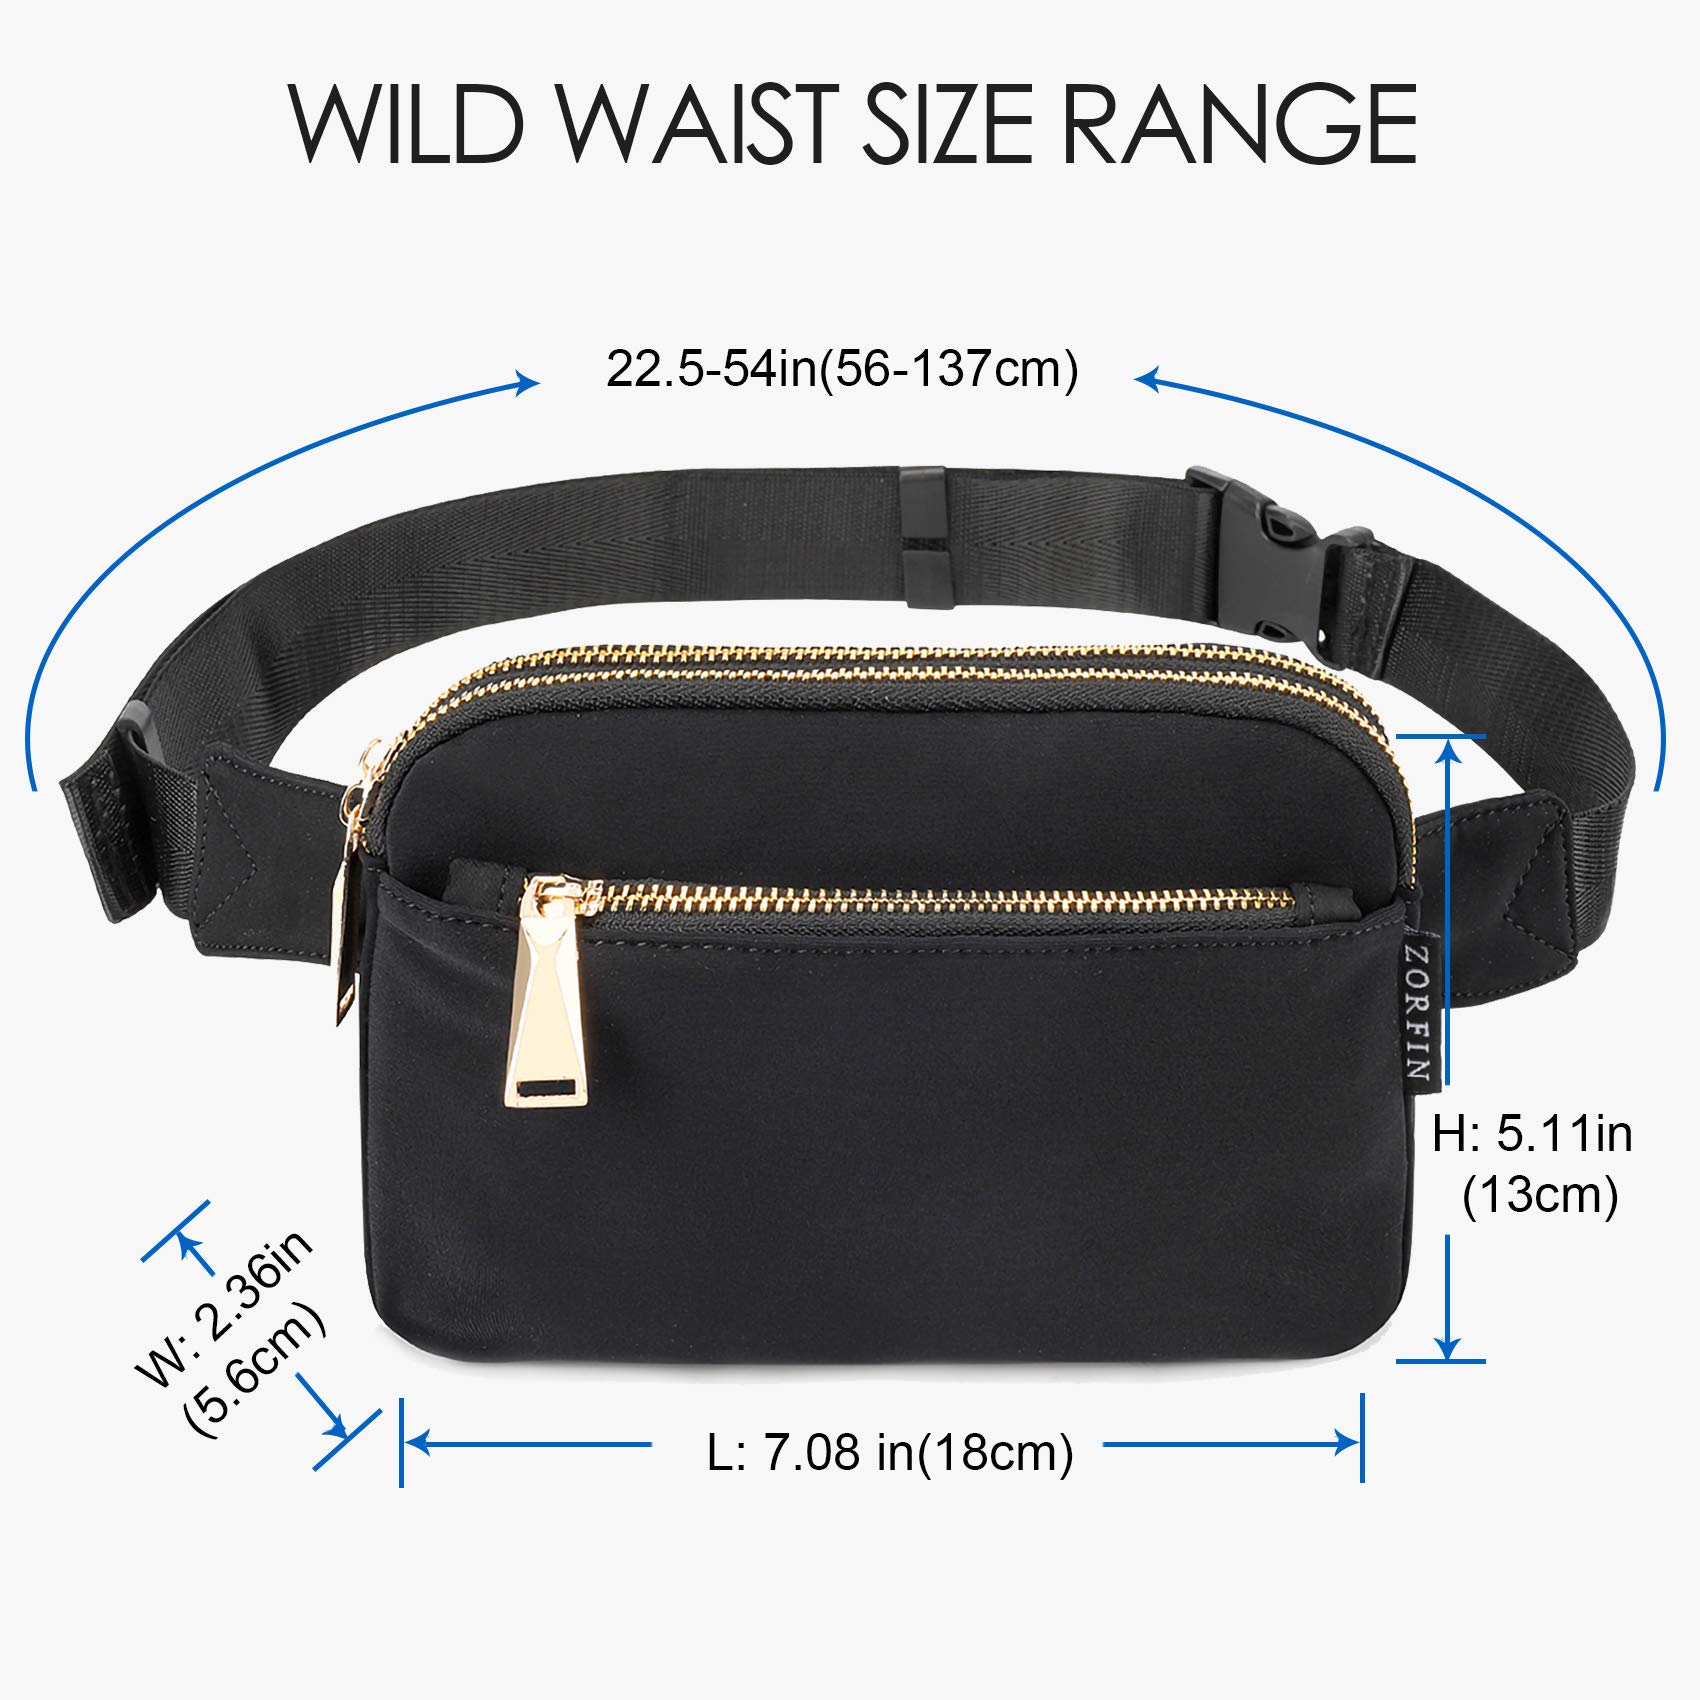 ZORFIN Fanny Packs for Women, Fashion Belt Bag with Adjustable Strap small waist bag Hip Bum Bag Crossbody Bags for Travel Workout Running Hiking